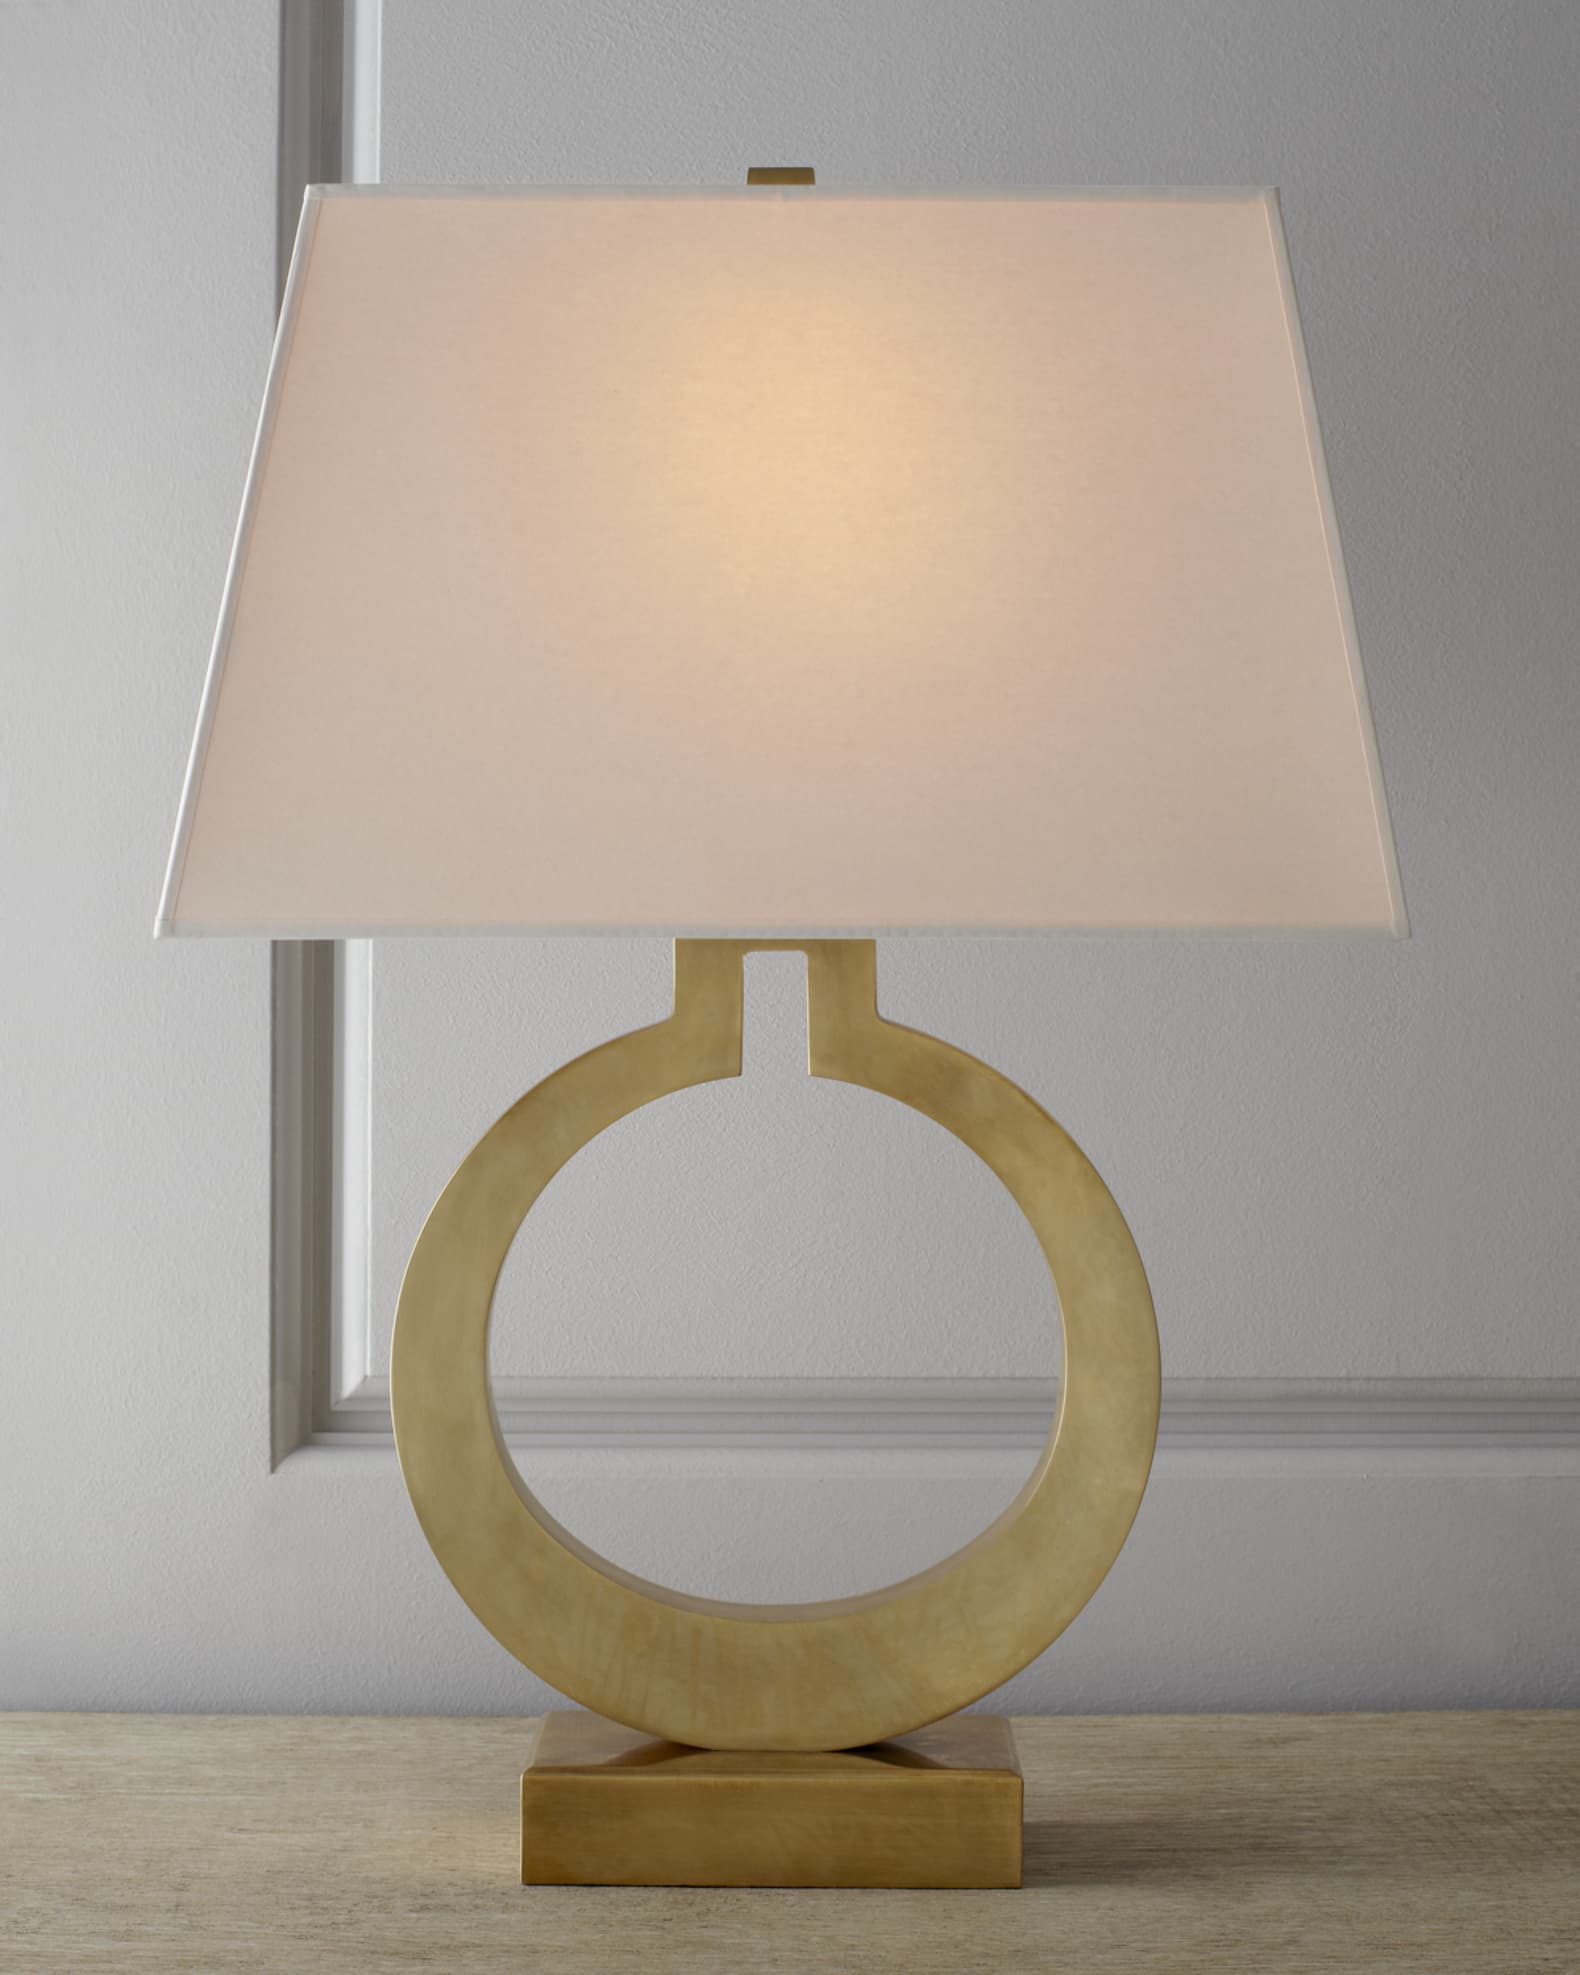 Visual Comfort E. F. Chapman Rings Table Lamp with Natural Paper Shade -  Gilded Iron